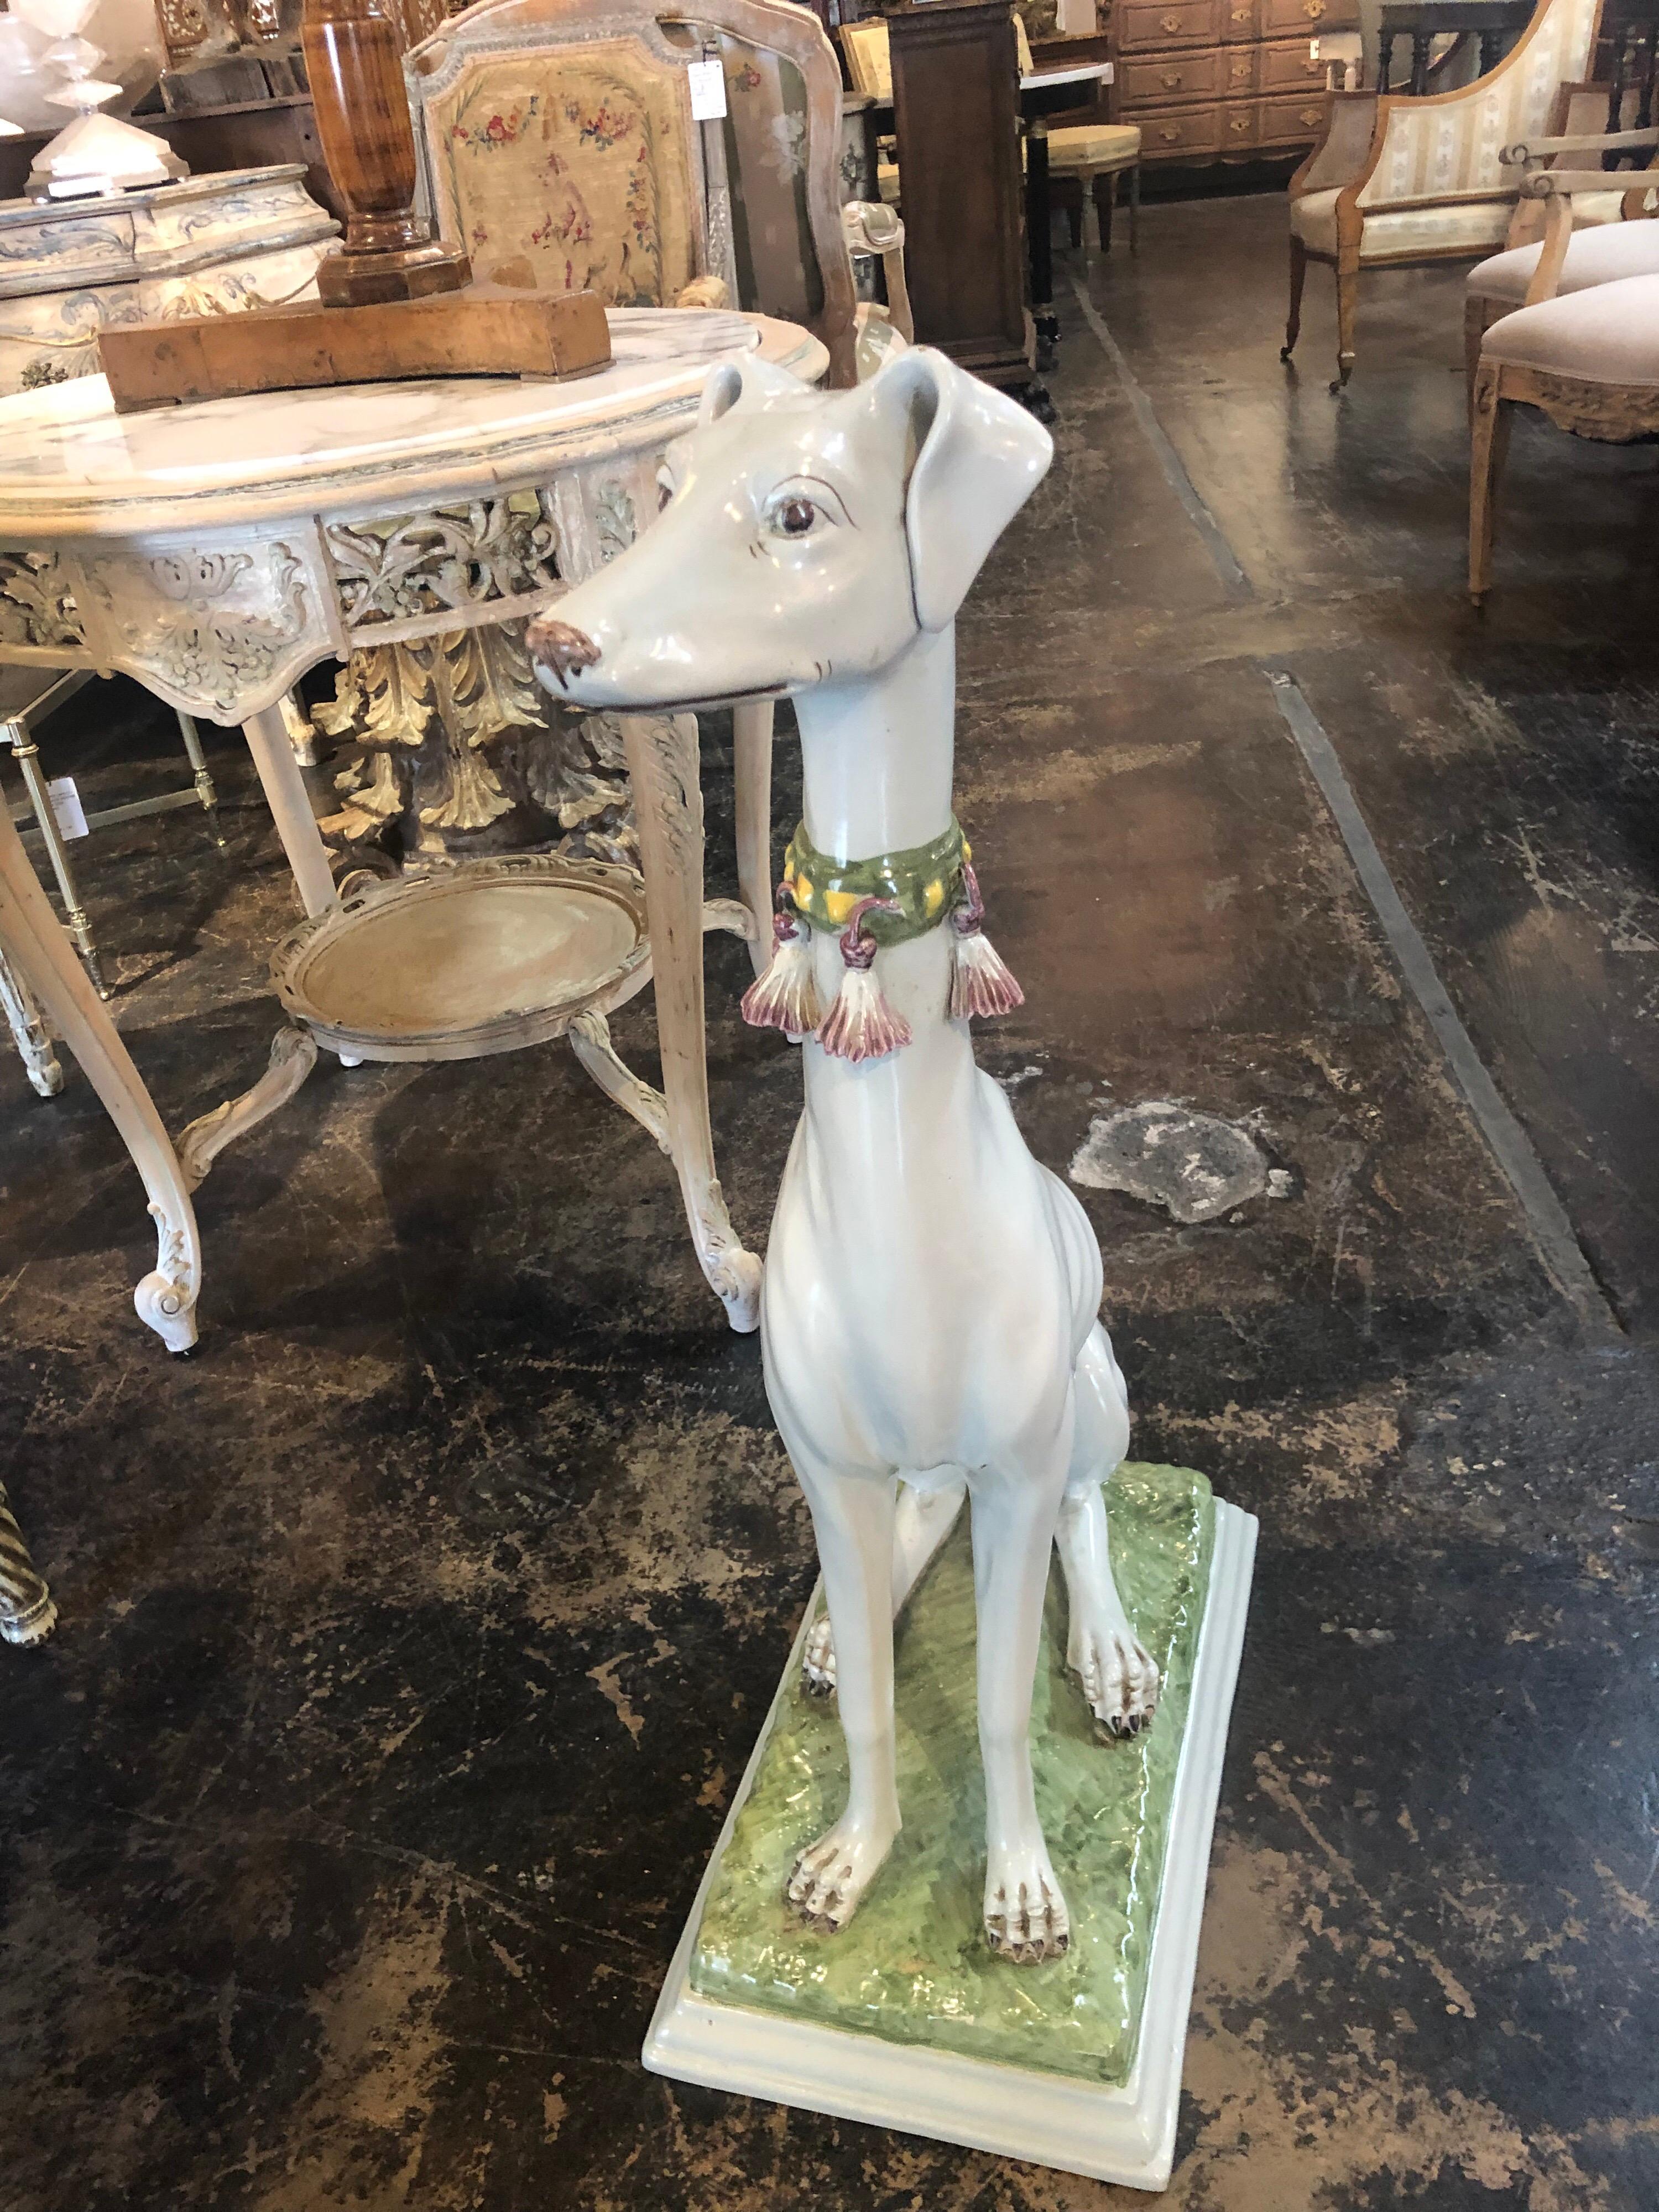 Very lovely decorative glazed porcelain whippet made in Italy. Extraordinary detail on this piece and fine quality as well. A charming decorative addition to any fine home.